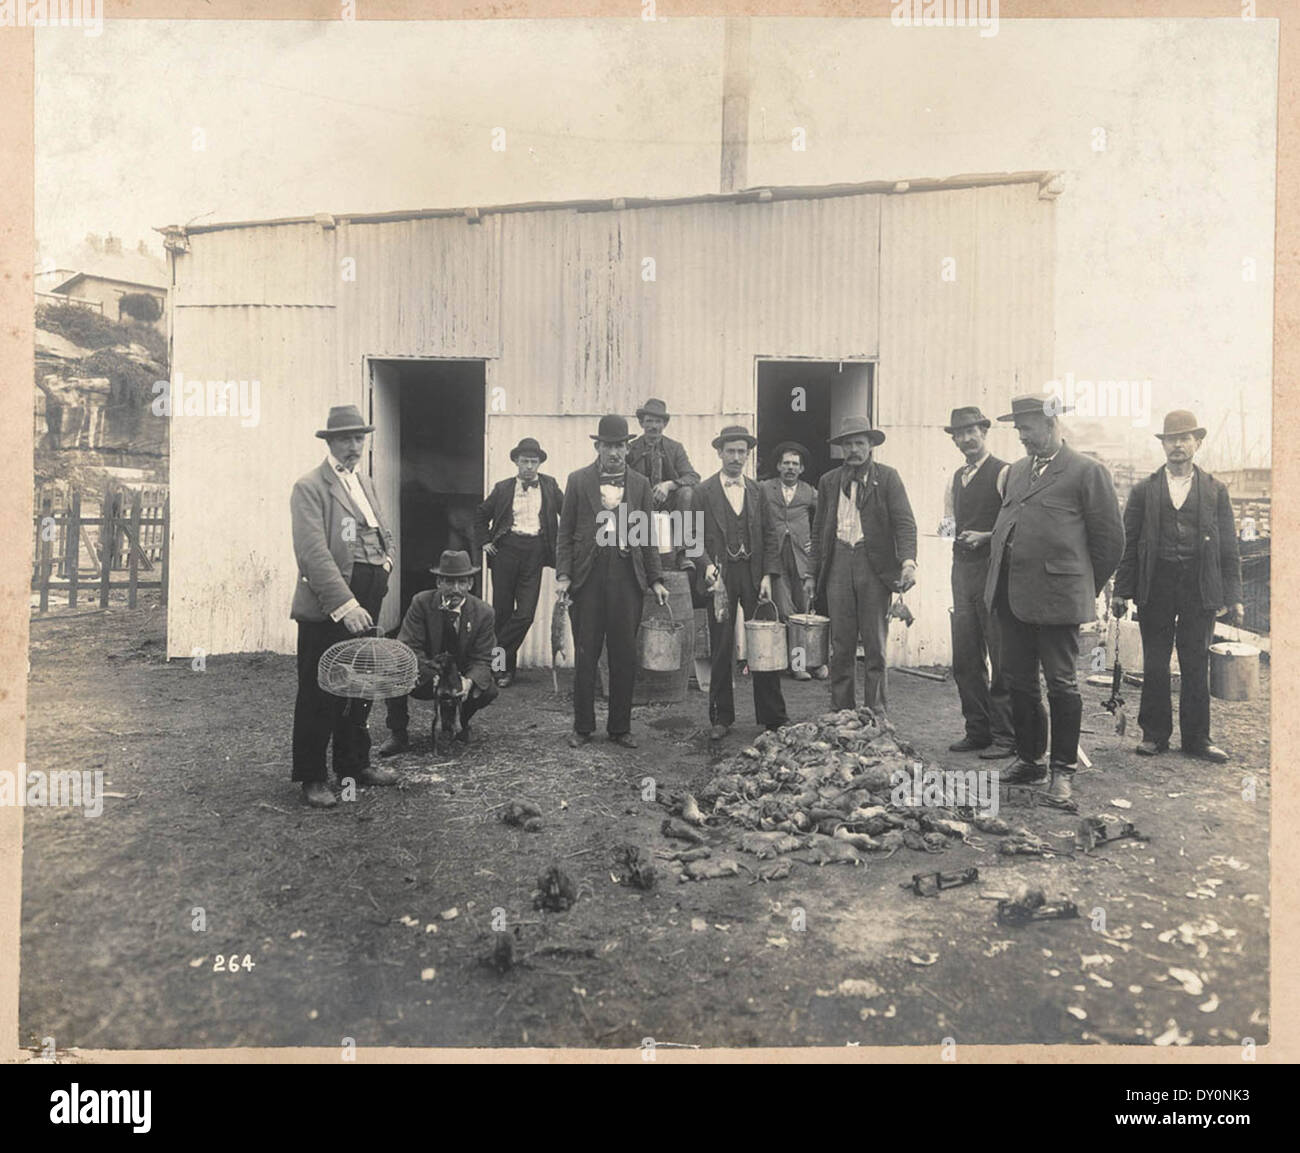 Professional Ratcatchers from Views taken during Cleansing Operations, Quarantine Area, Sydney, 1900, Vol. IV / under the supervision of Mr George McCredie, F.I.A., N.S.W. photographed by John Degotardi Jr. Stock Photo